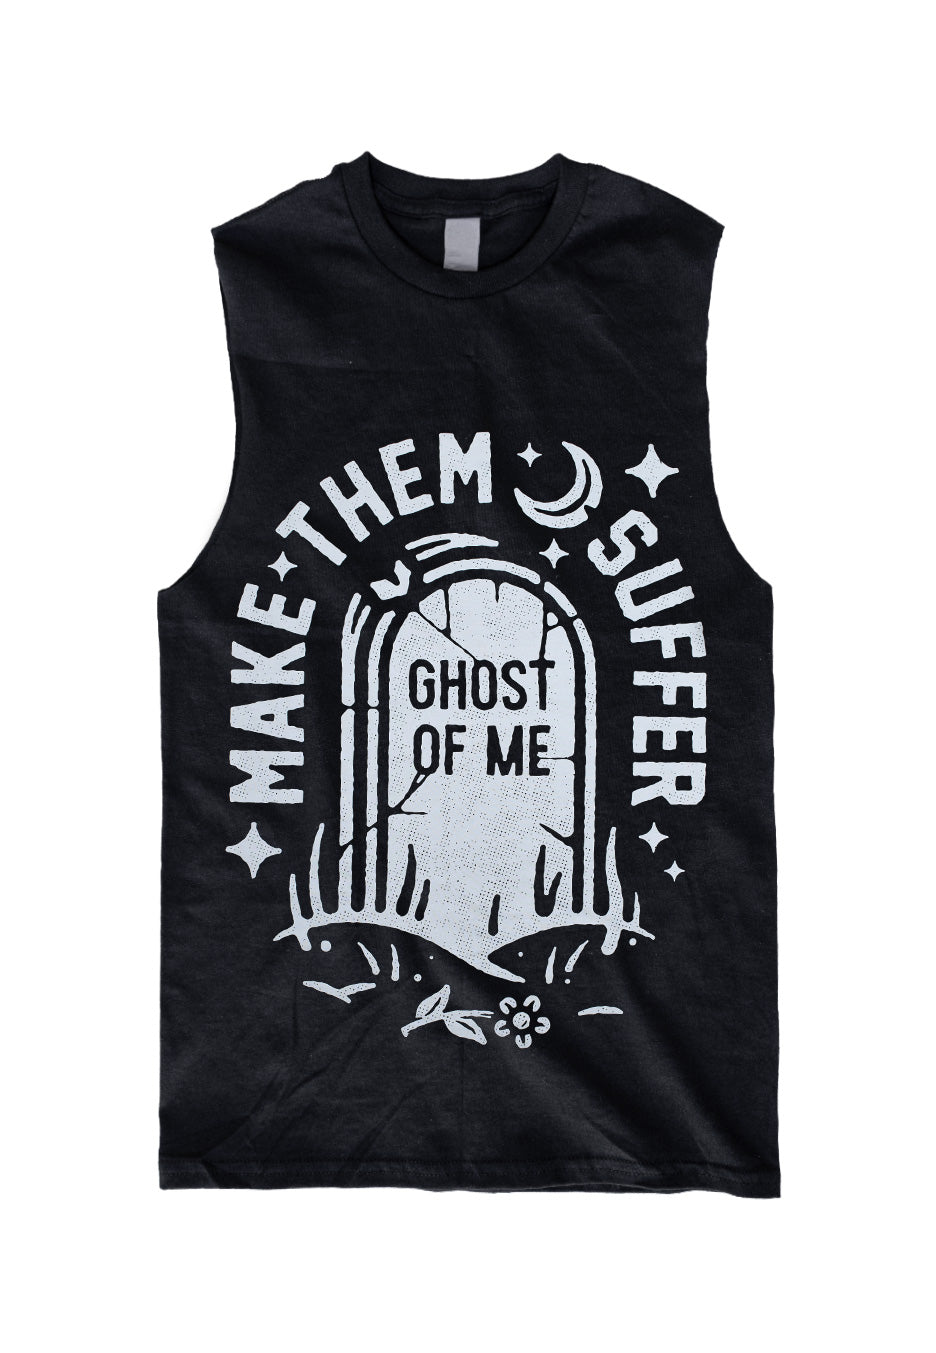 Make Them Suffer - Ghost Of Me - Sleeveless | Neutral-Image